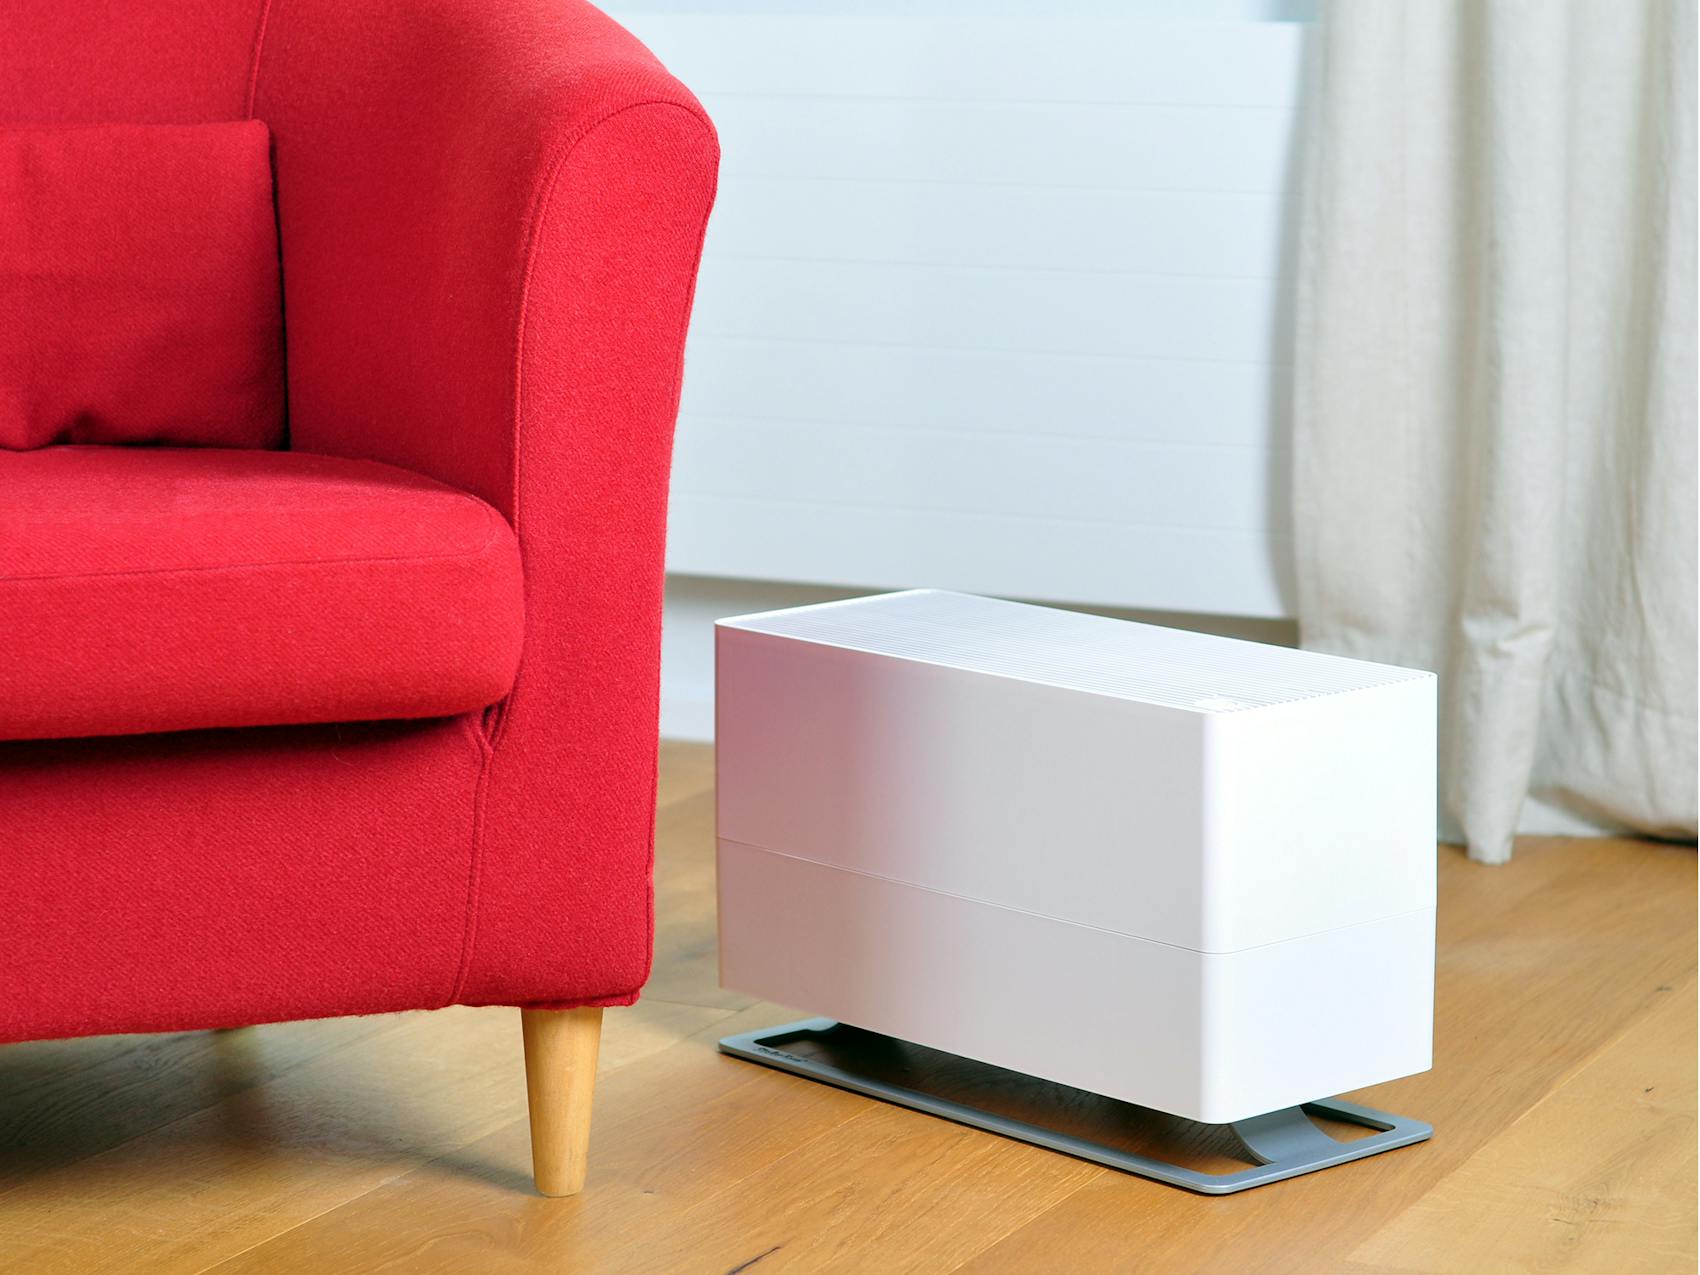 Oskar big humidifier by Stadler Form in white next to a red armchair 